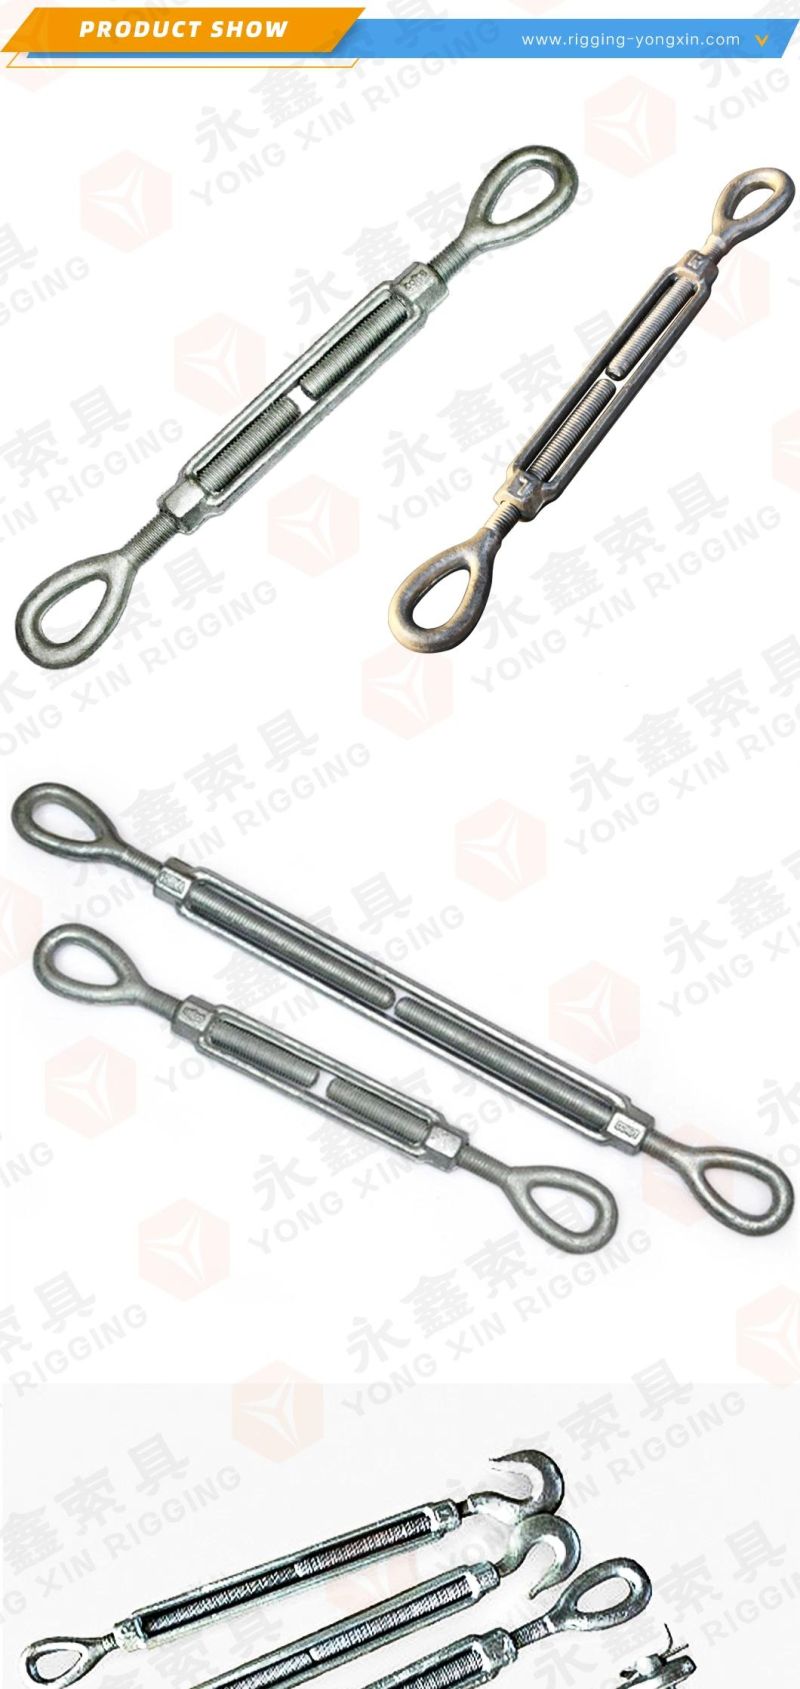 Cast Malleable Iron Commercial Type Turnbuckle with Eye Hook